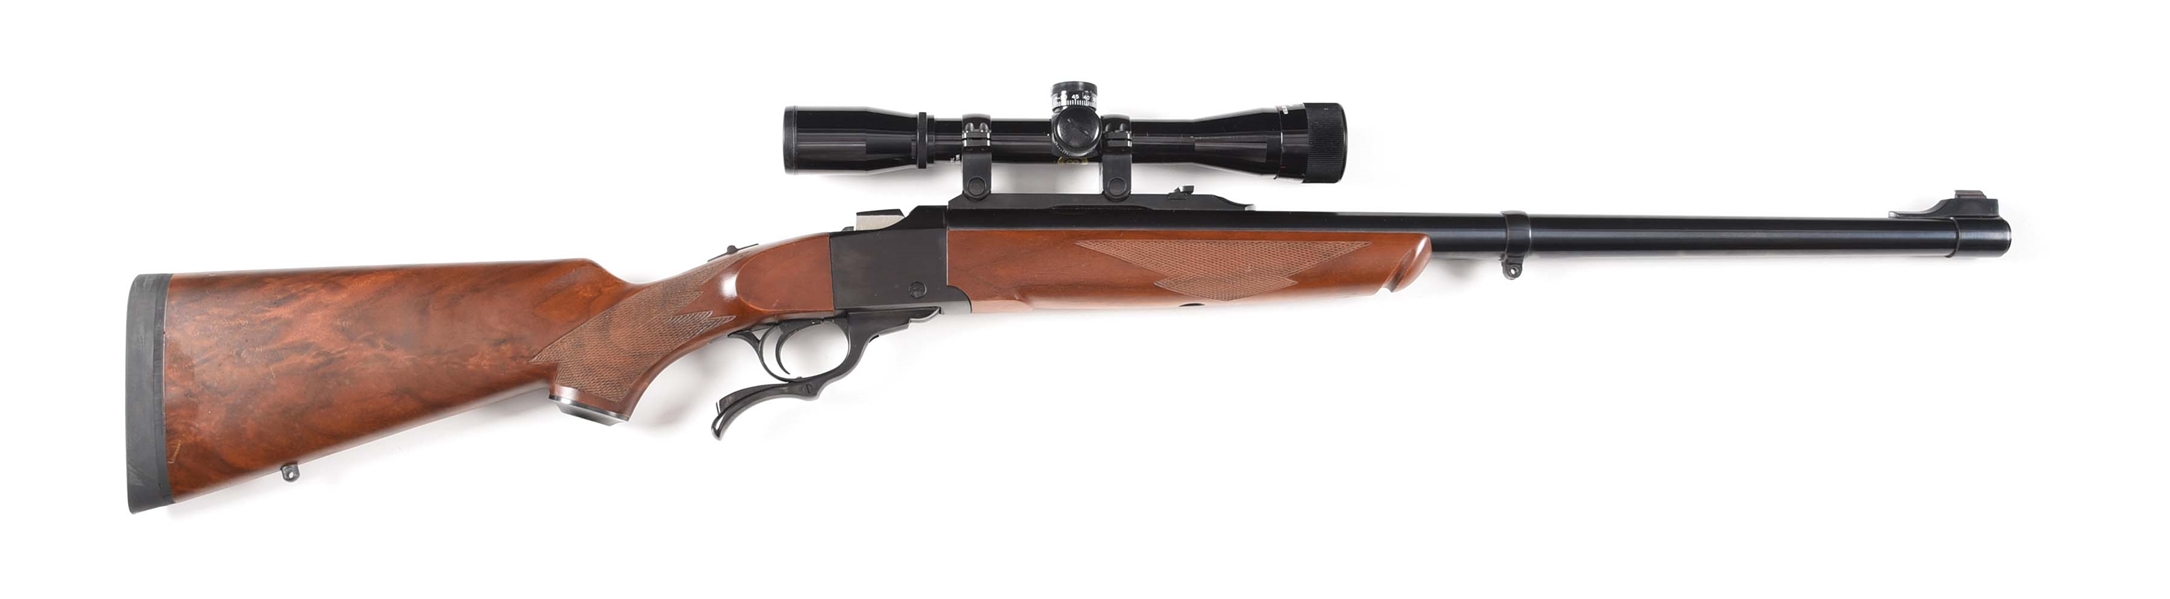 (M) RUGER NO. 1-H TROPICAL .458 WIN MAG SINGLE SHOT RIFLE WITH SCOPE.